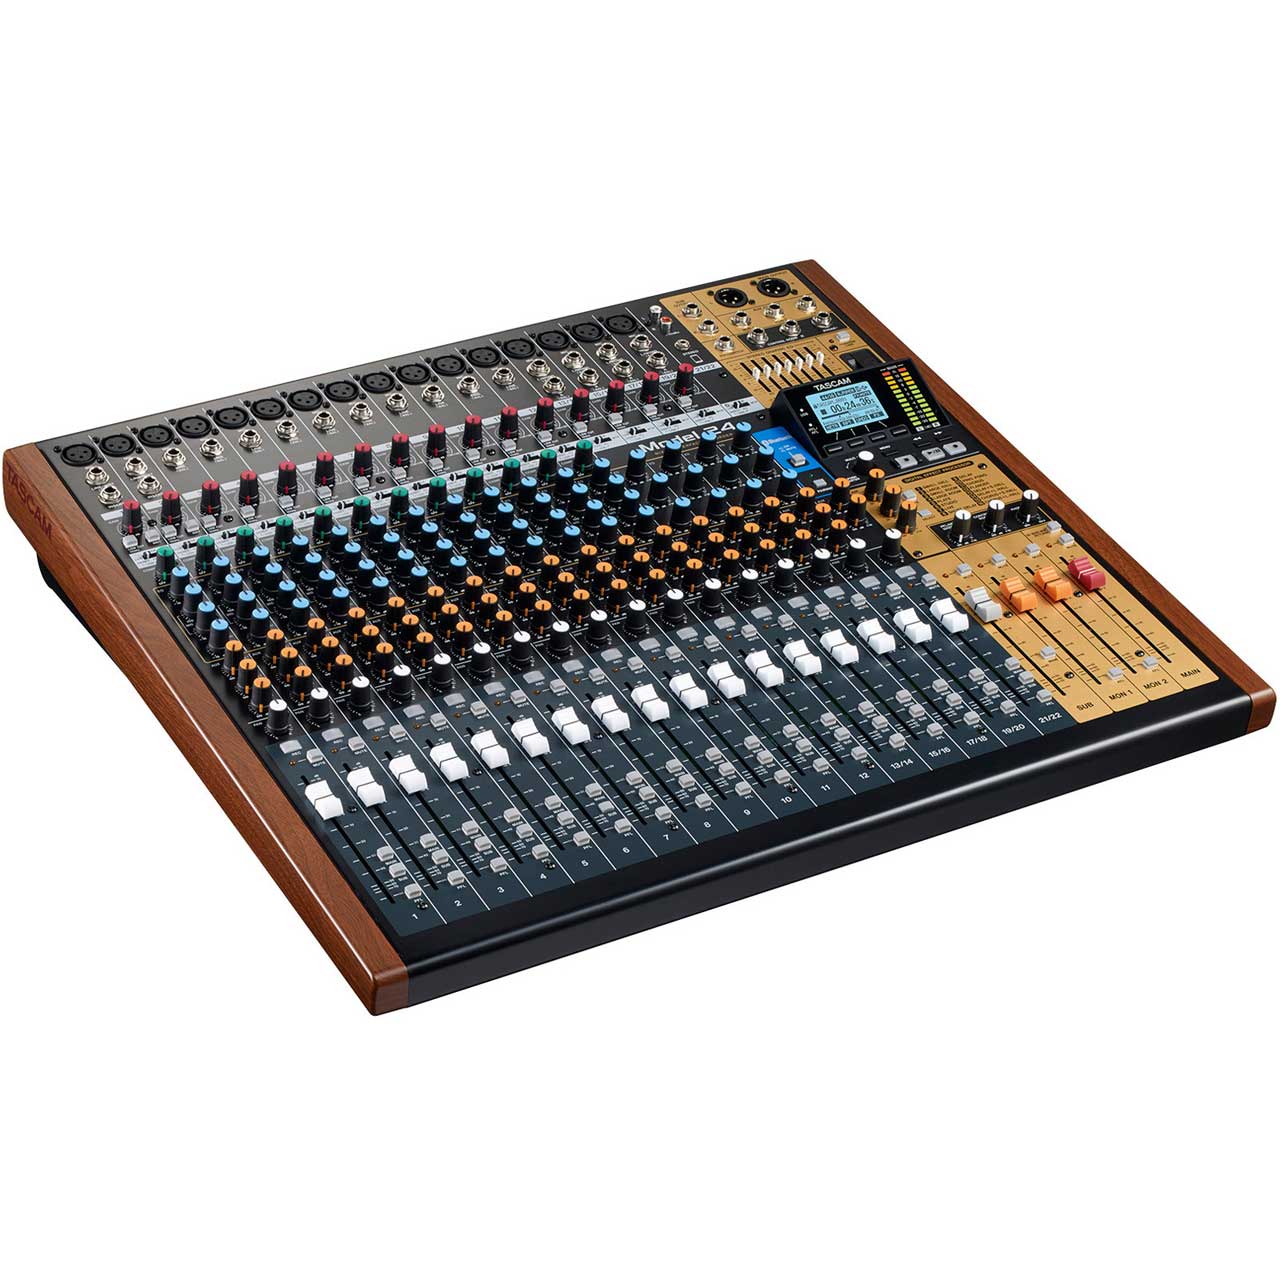 Recorder/USB　Tascam　Track　Mixer/24　Interface　Model　22　24　Channel